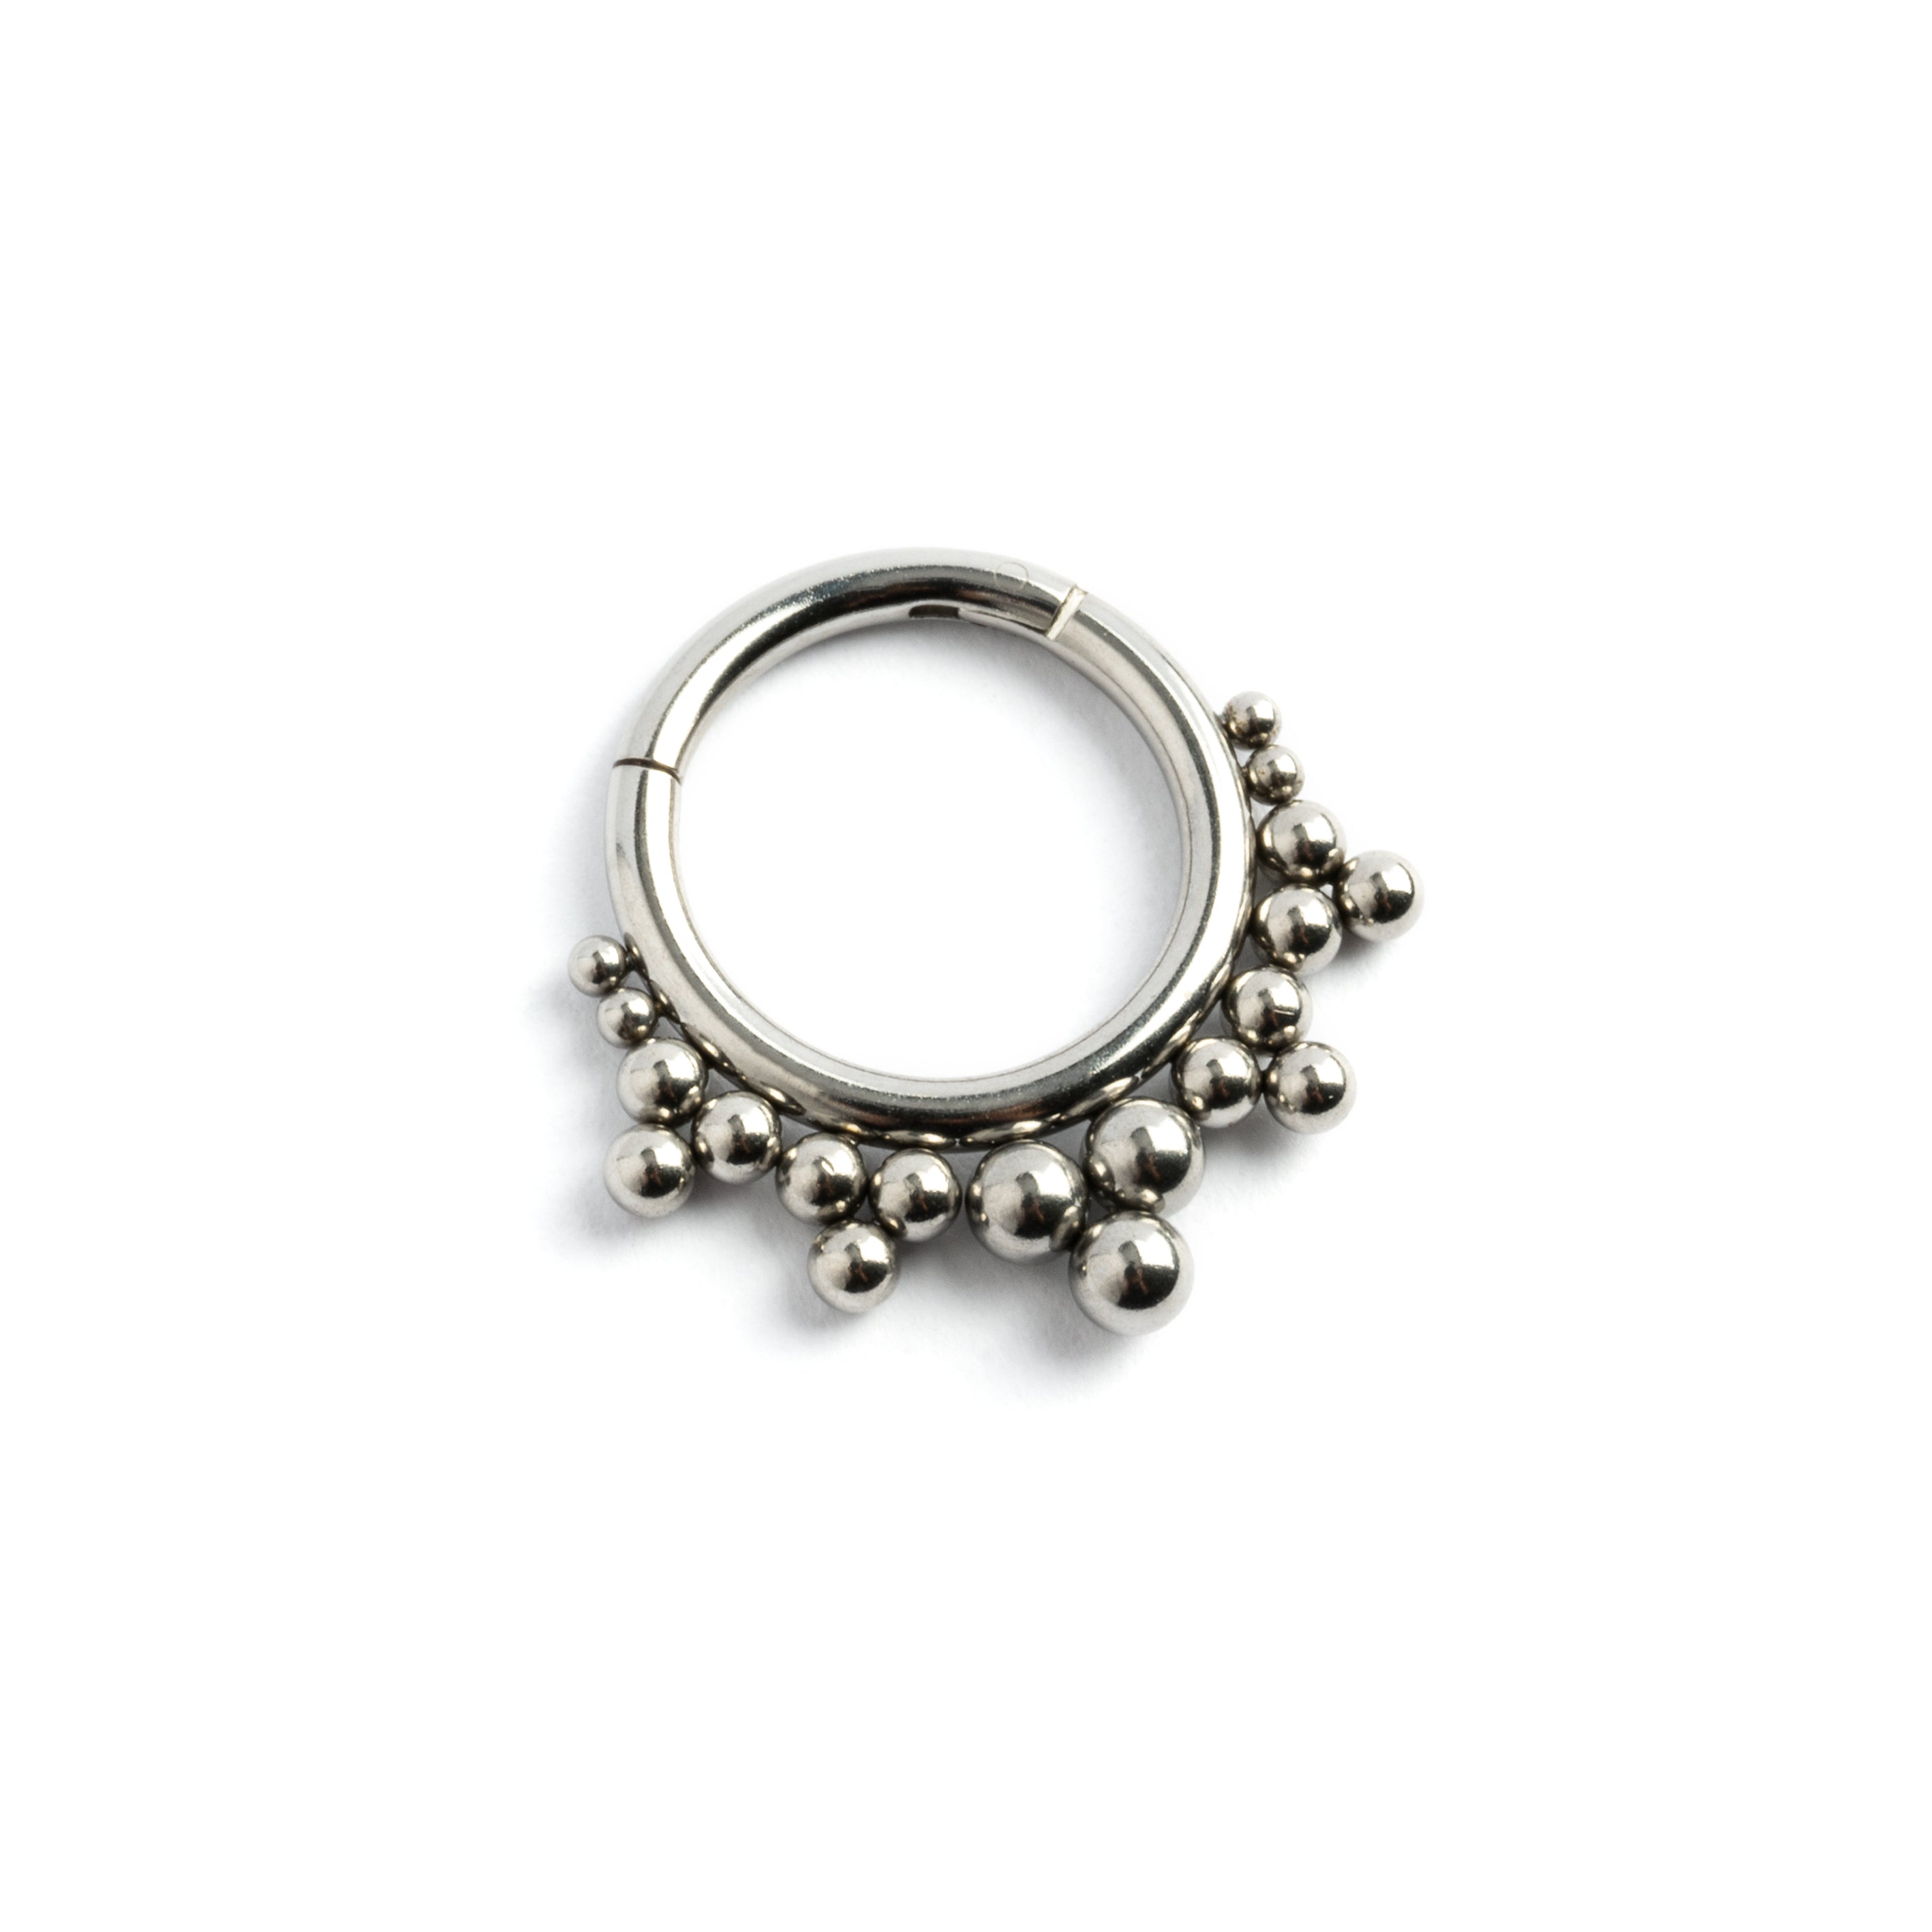 Layla surgical steel septum clicker ring left side view